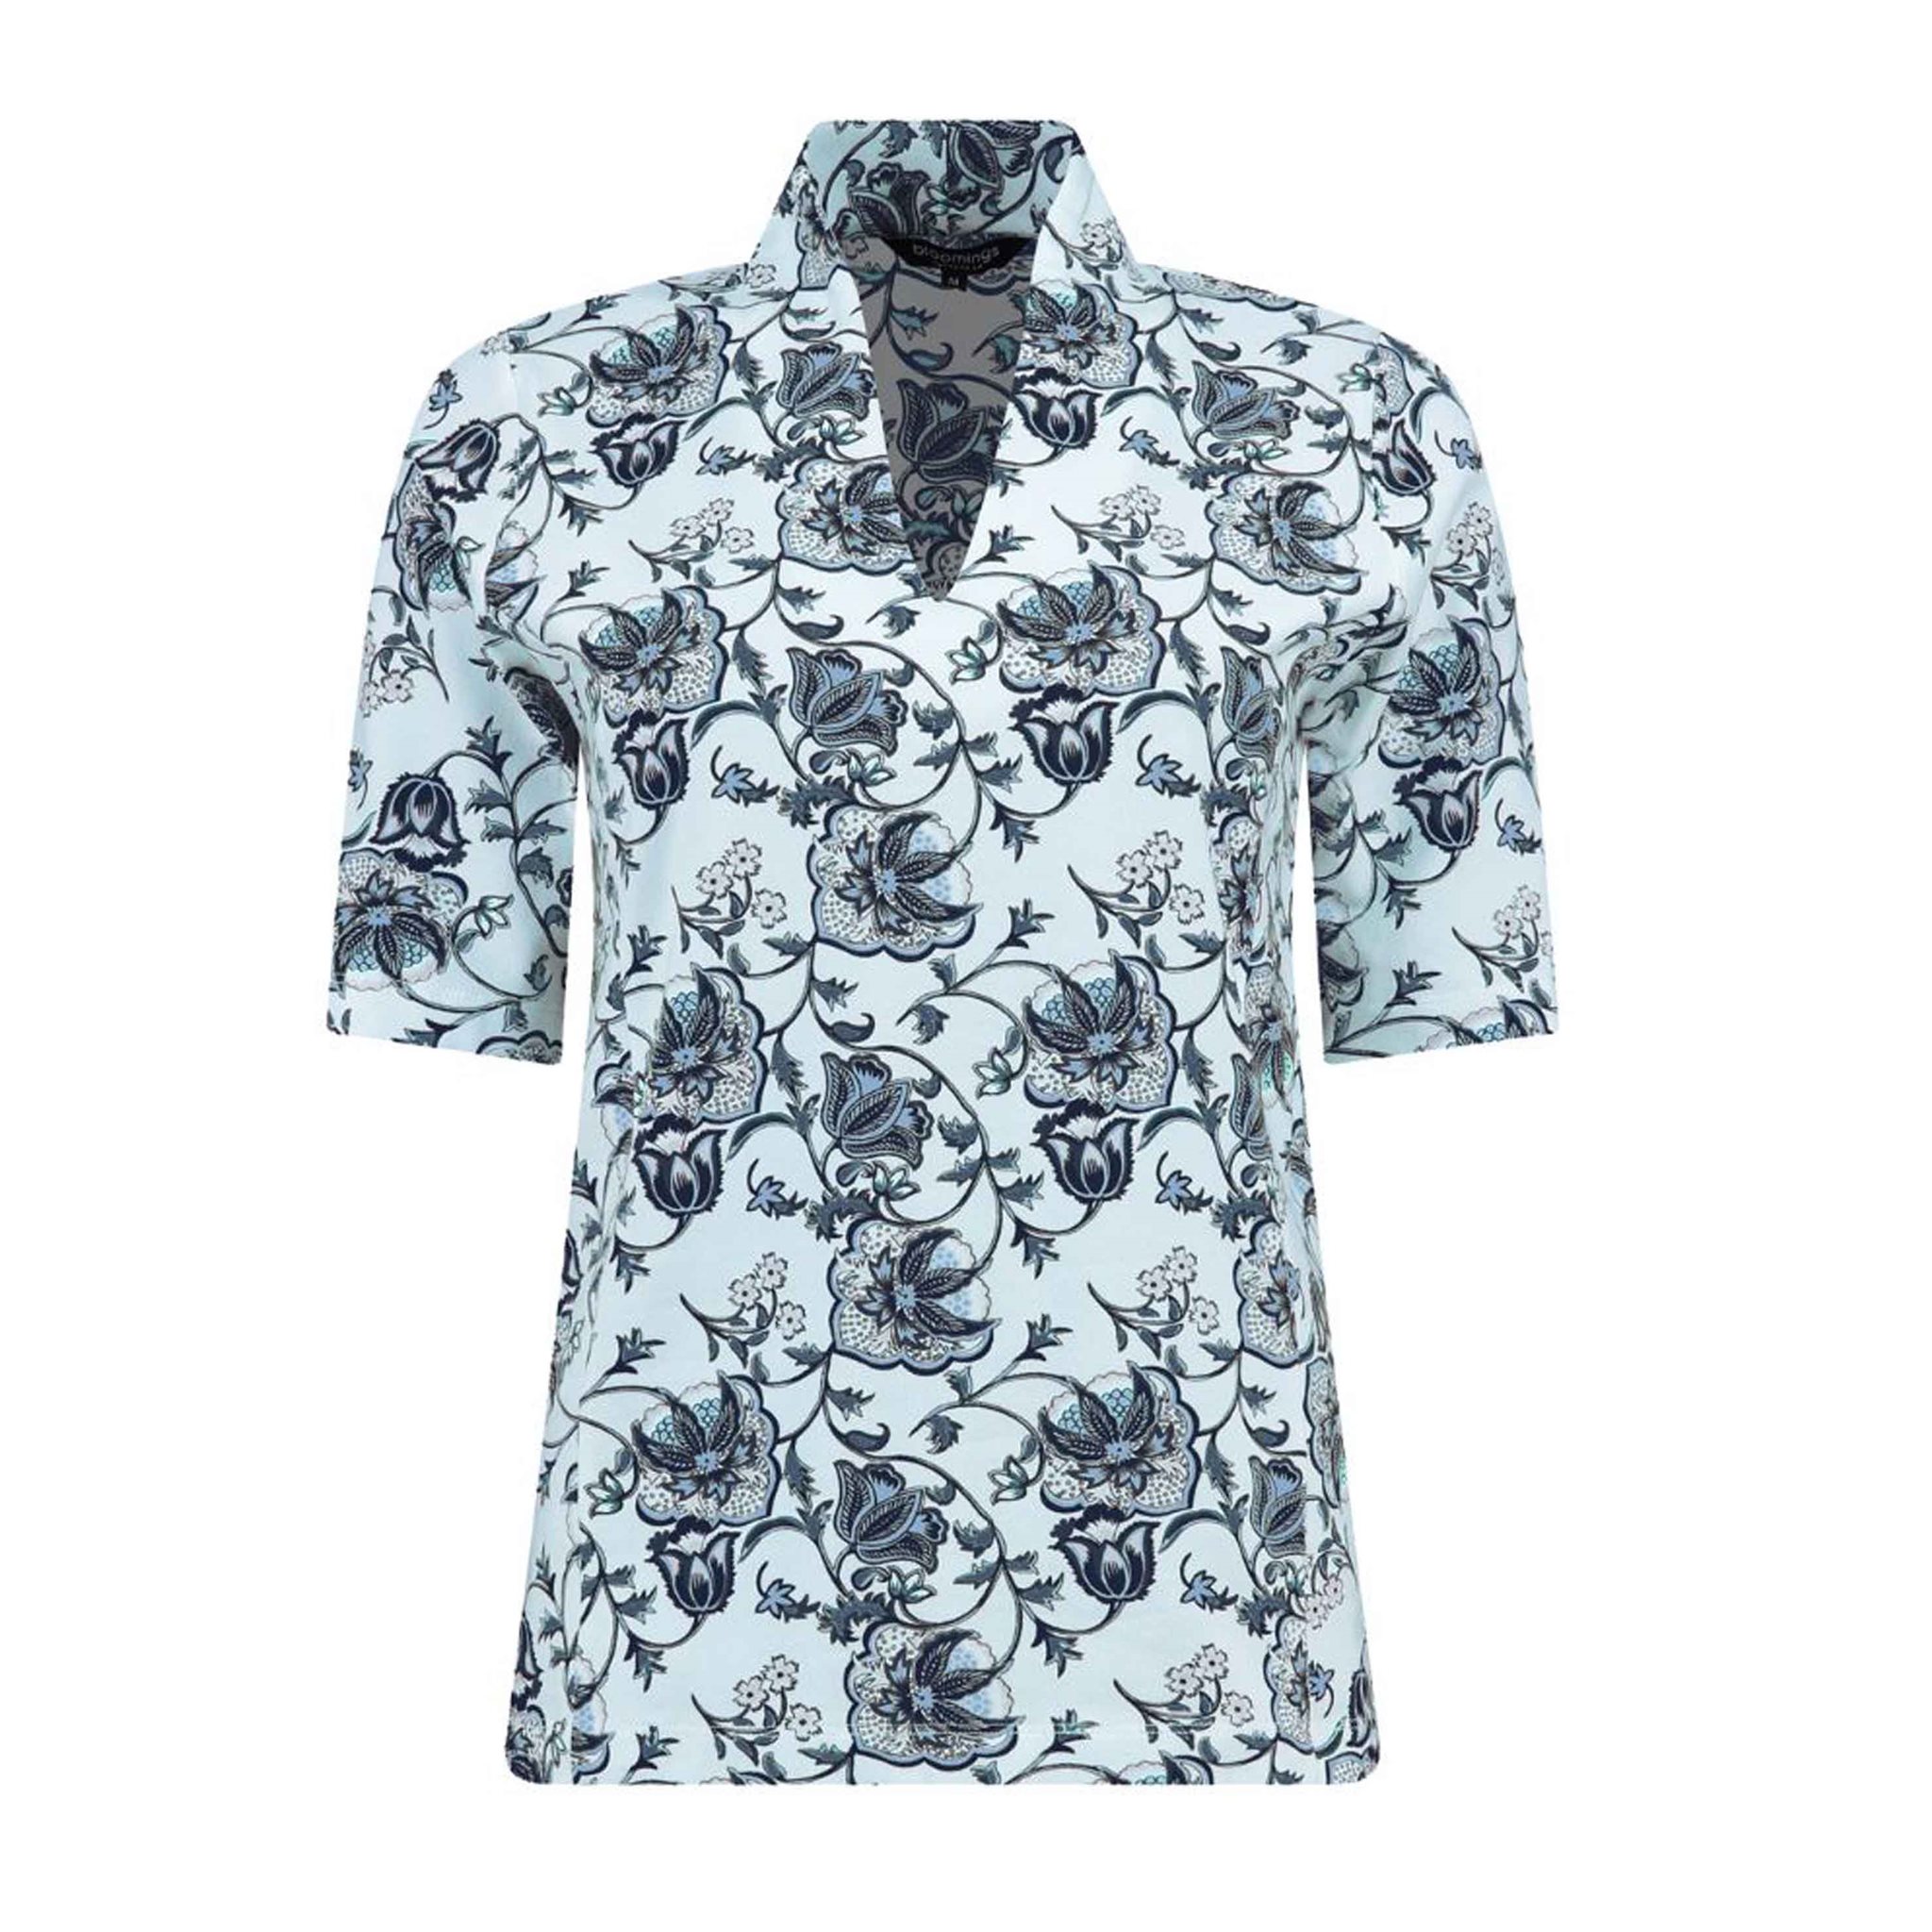 Stand up collar shirt s/s prin BLOOMINGS